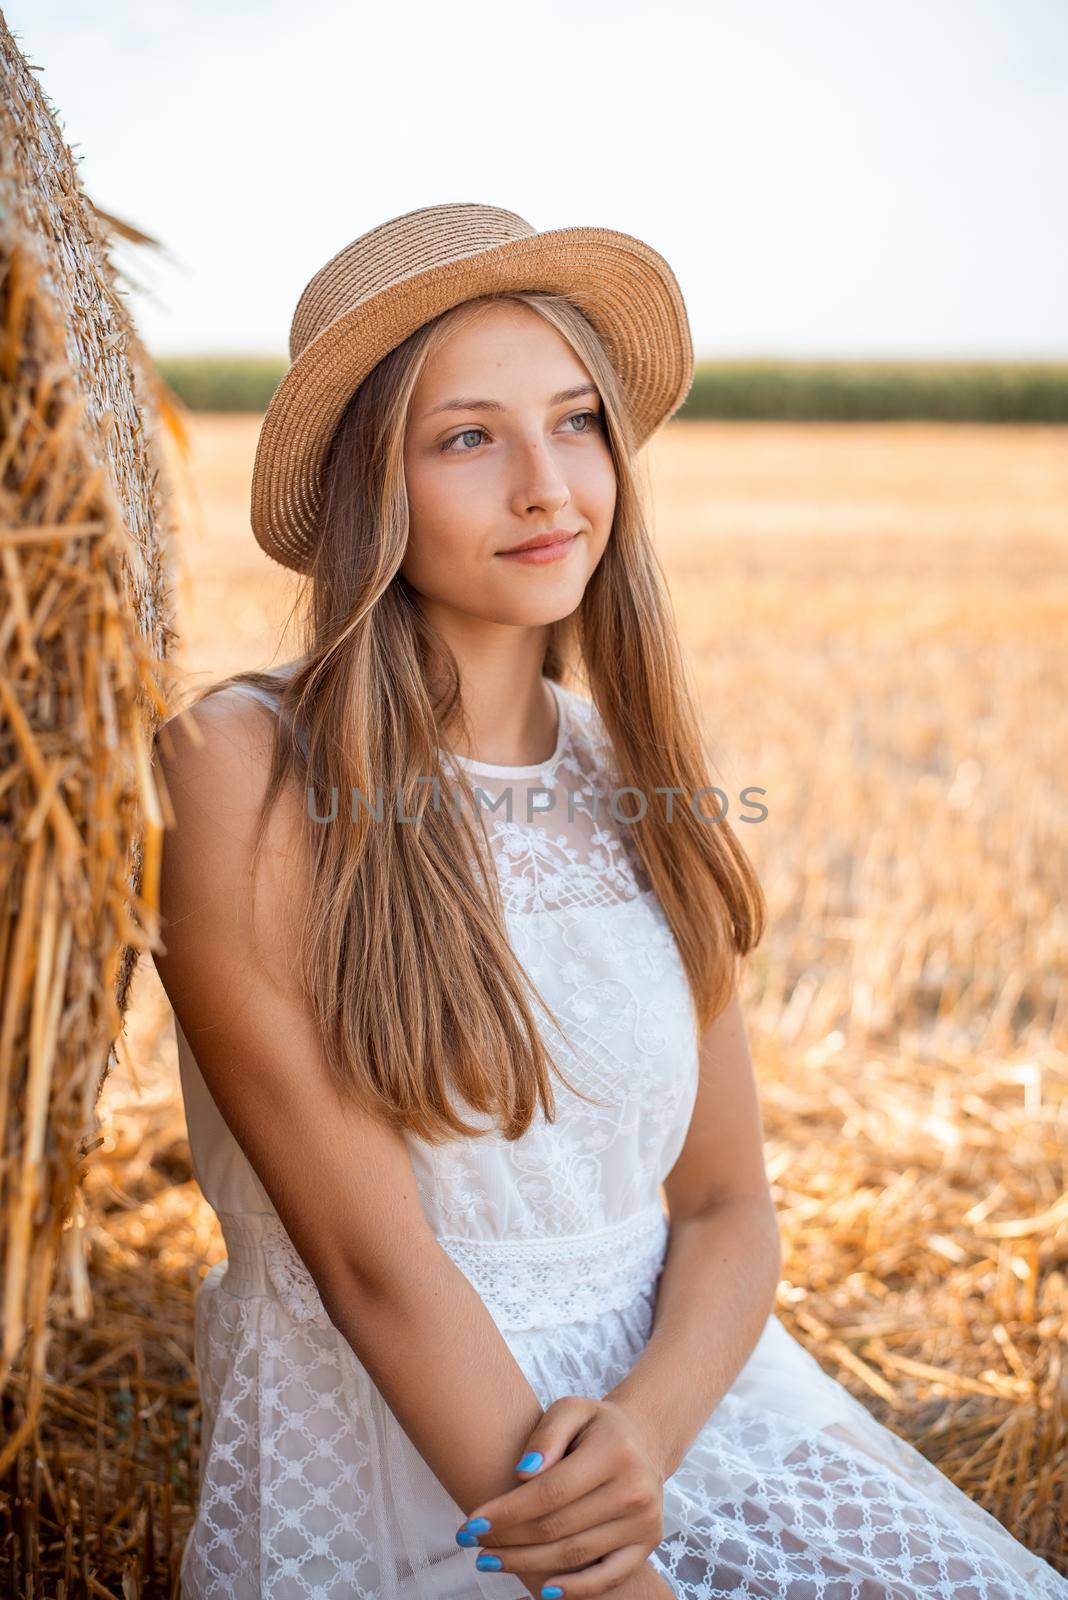 Romantic young girl posing outdoor in the agricultural field after the harvest by VitaliiPetrushenko